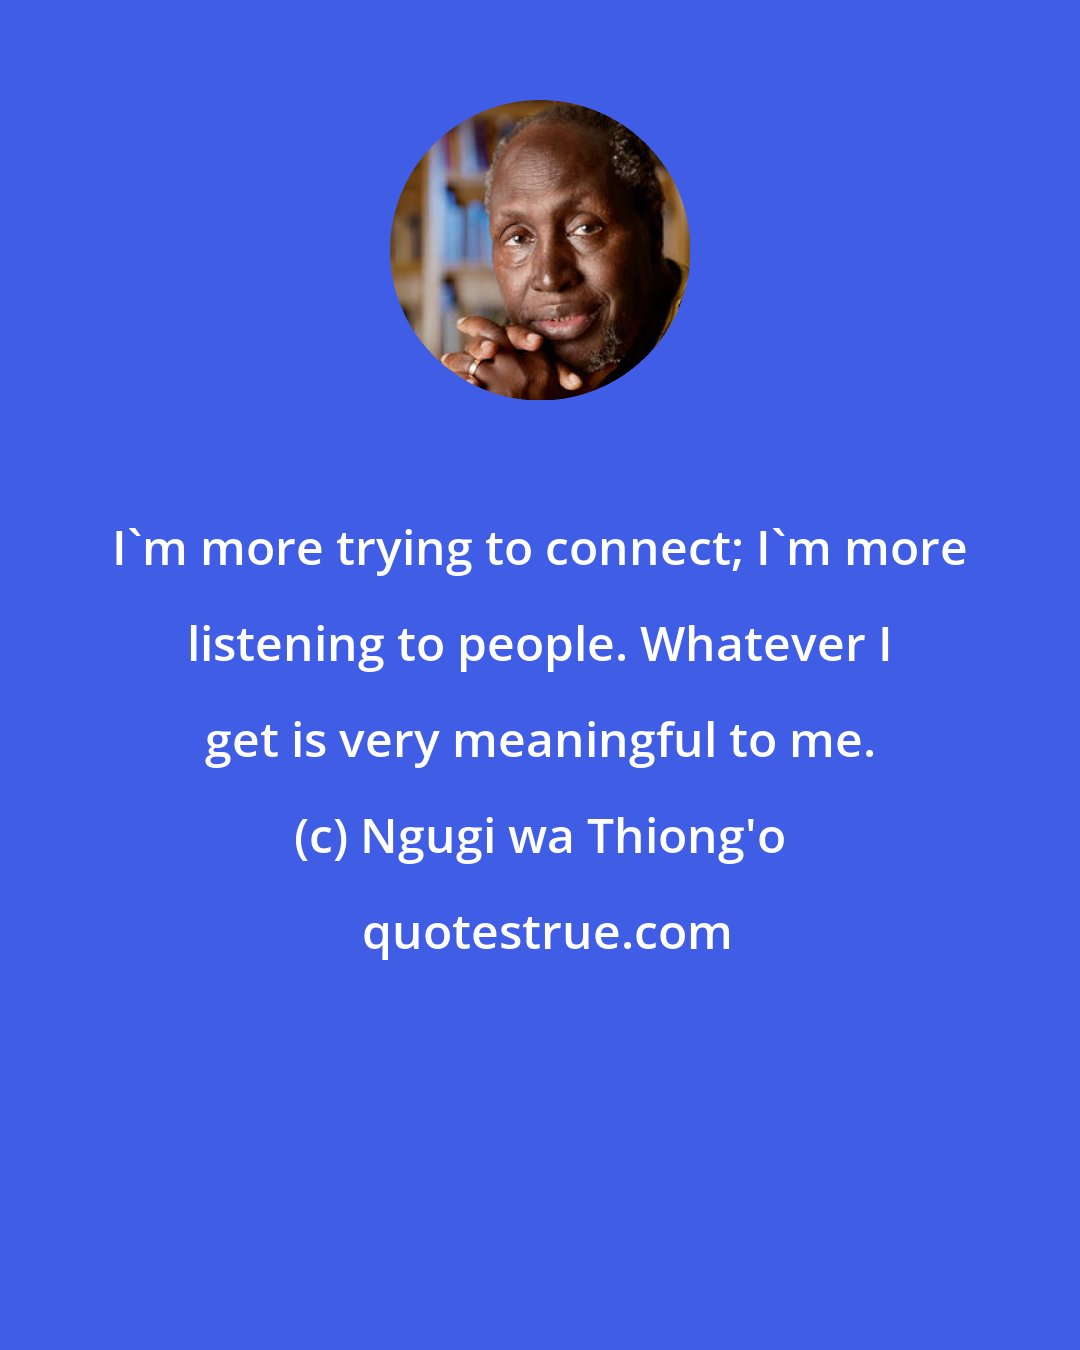 Ngugi wa Thiong'o: I'm more trying to connect; I'm more listening to people. Whatever I get is very meaningful to me.